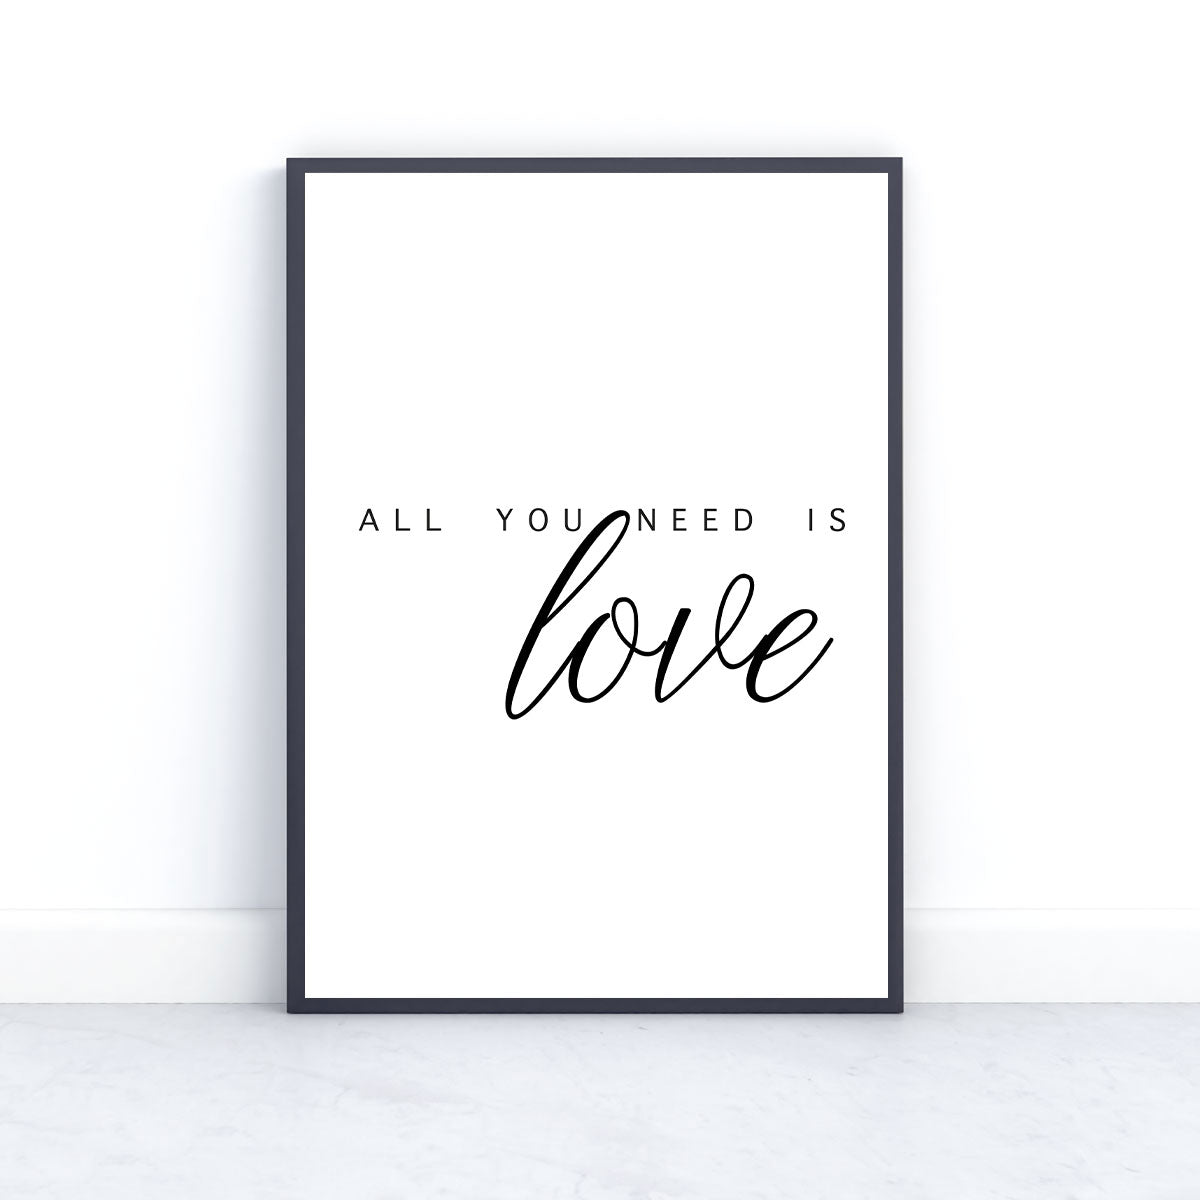 Poster "All you need is love"